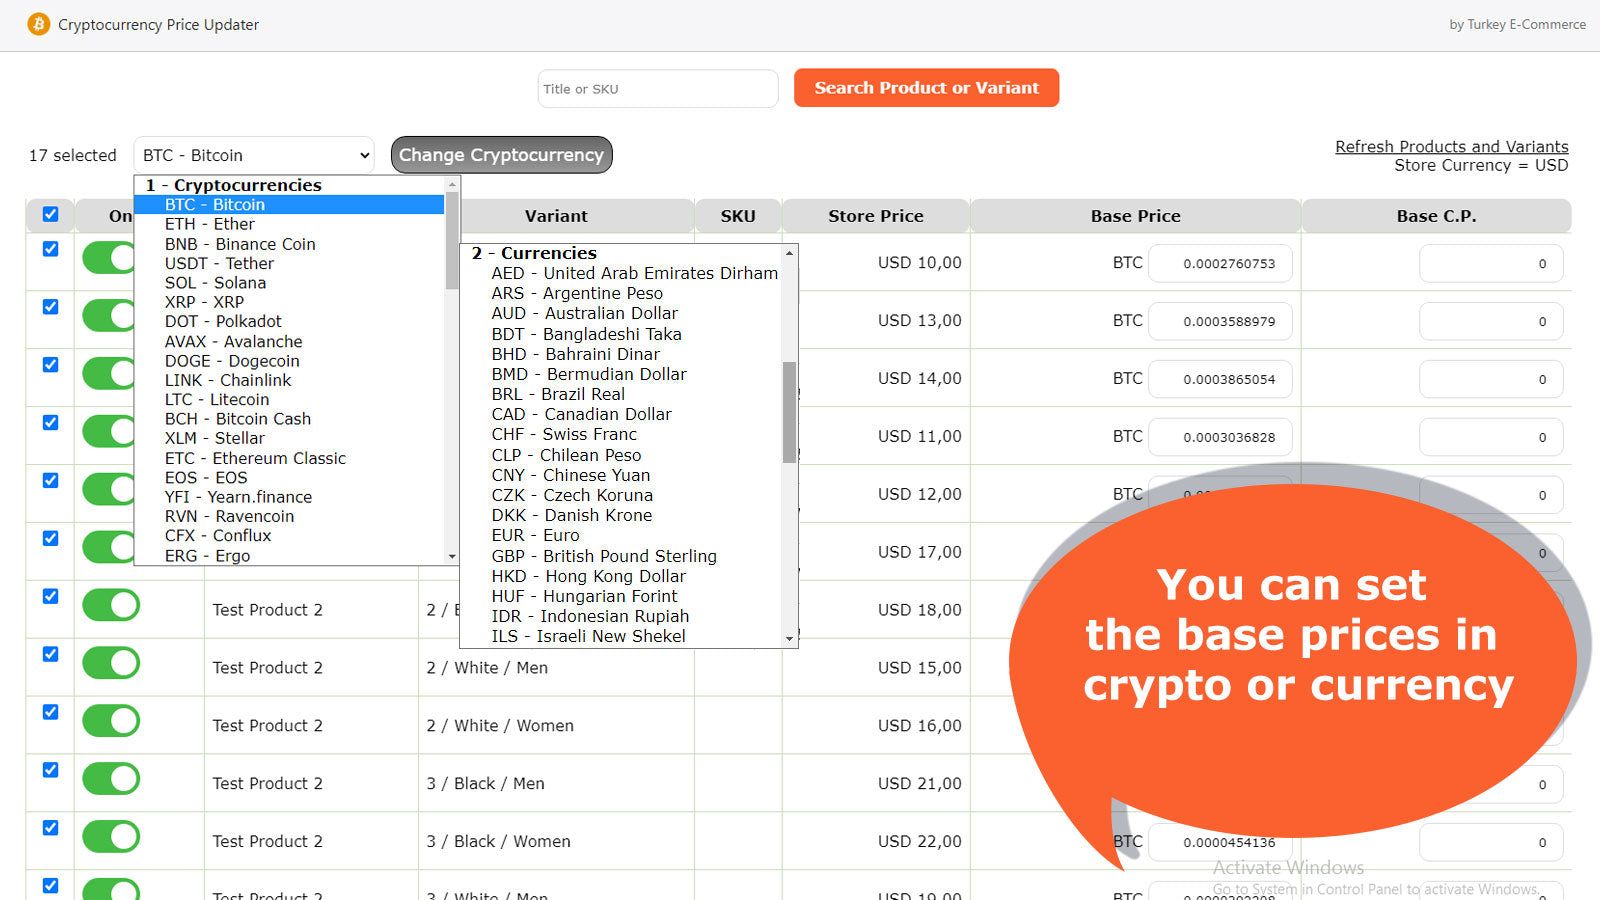 You can set the base prices in crypto or currency per product